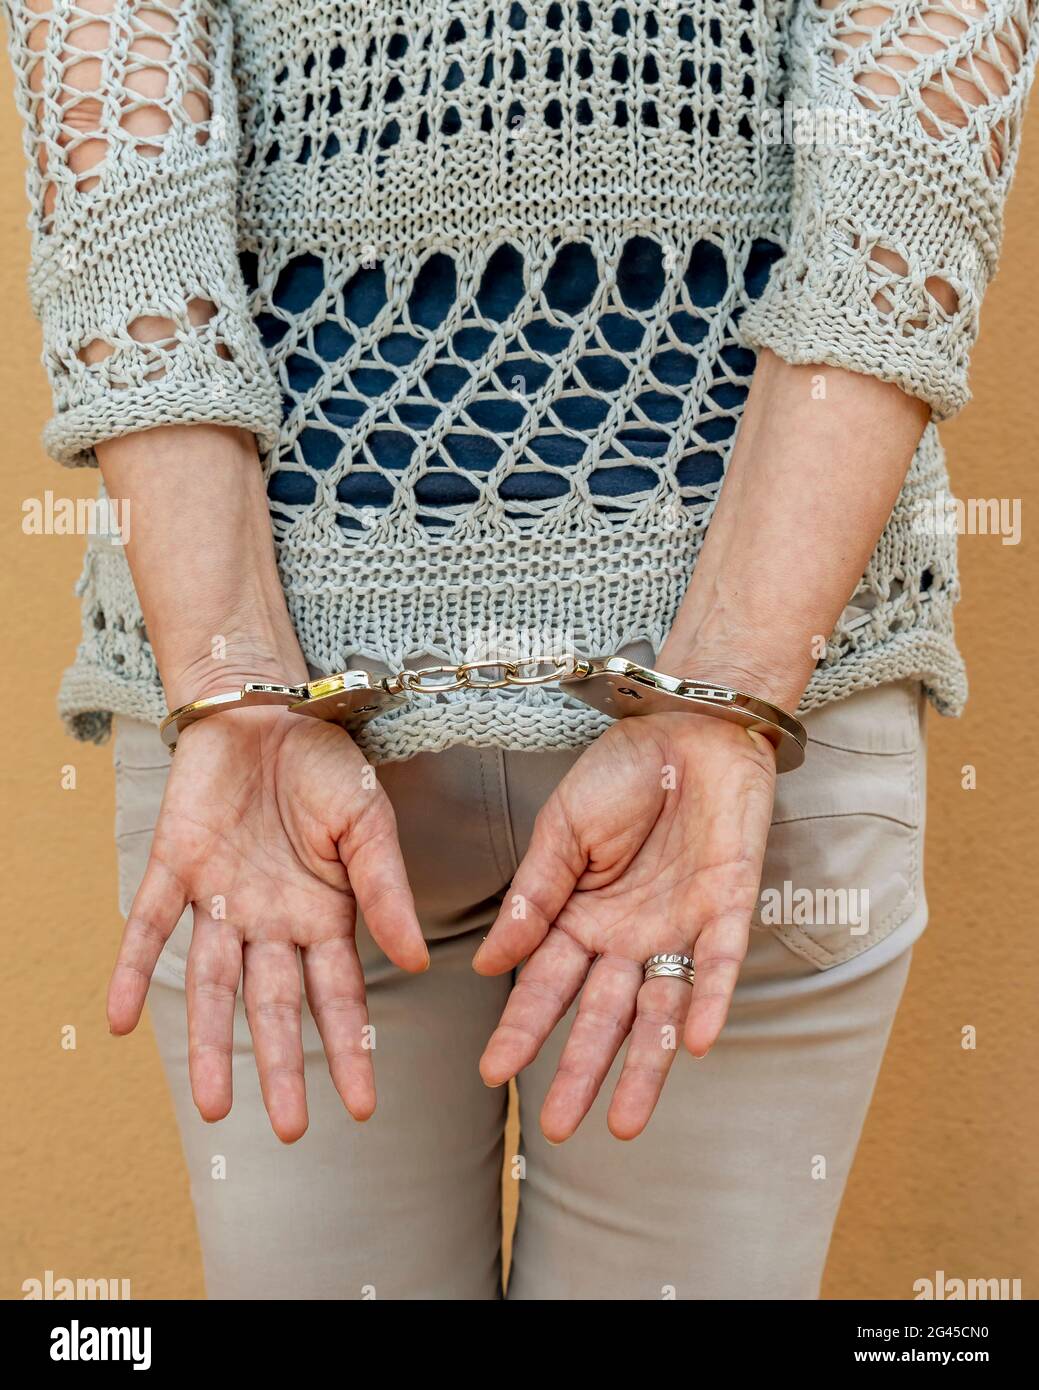 A woman is handcuffed while standing with her hands tied behind her back Stock Photo